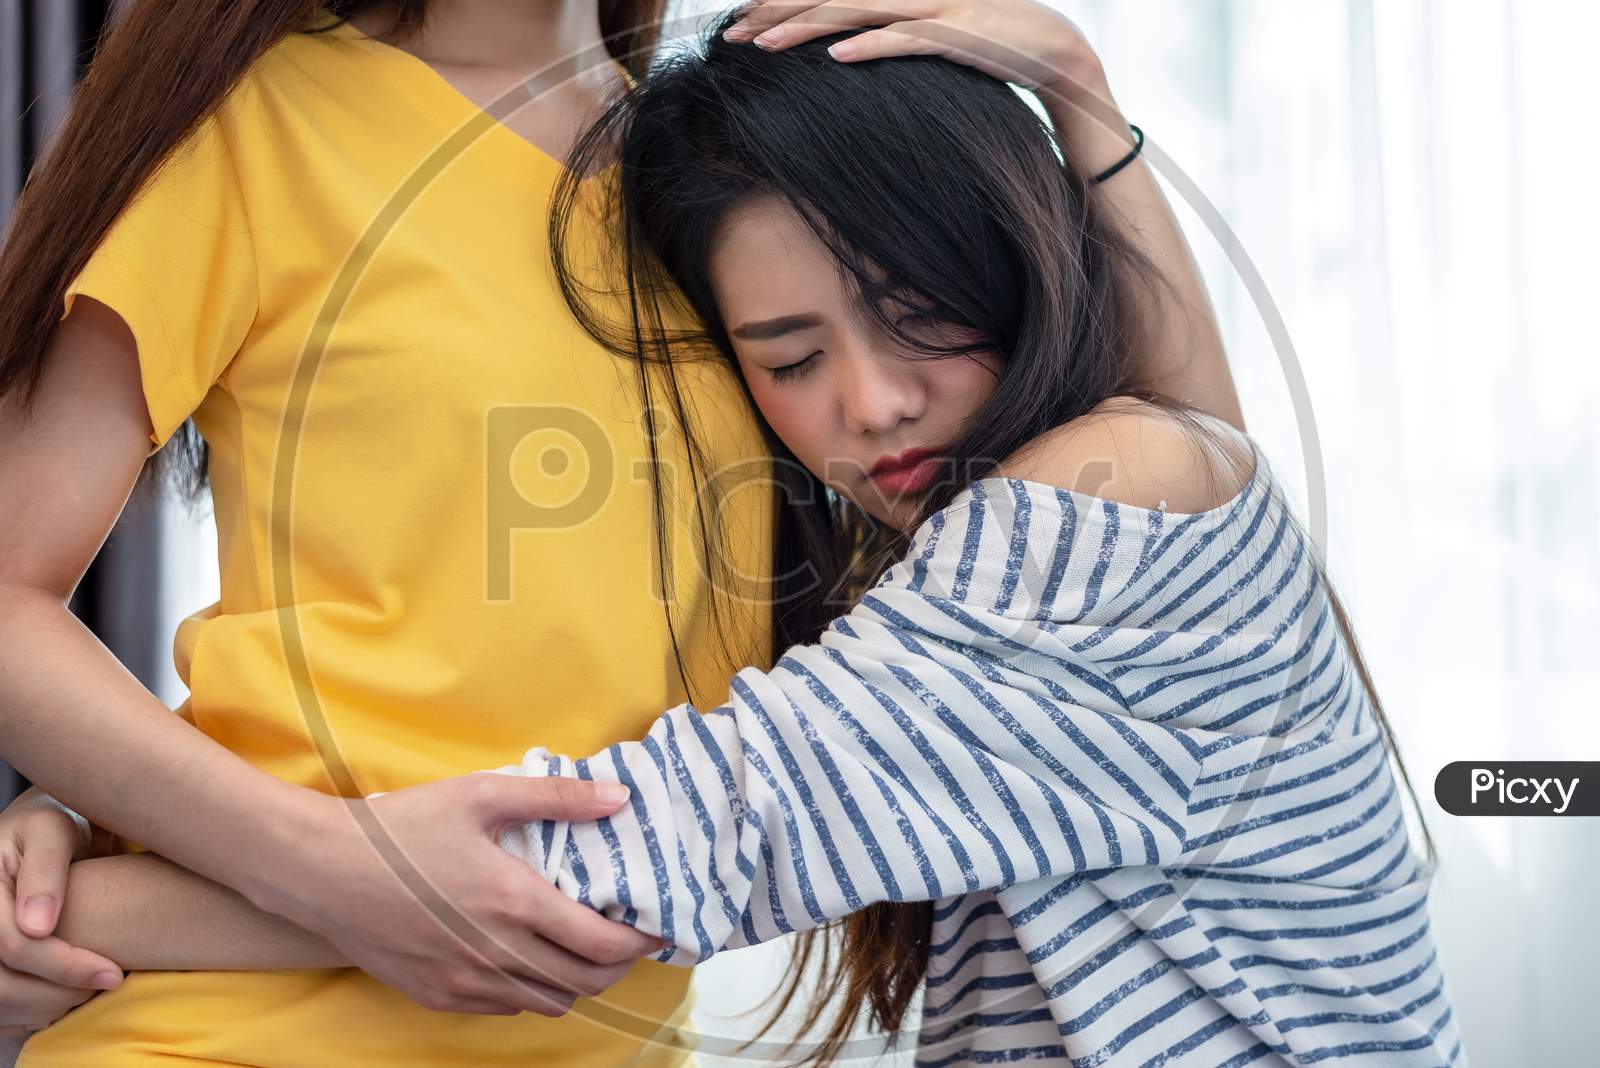 Asian Beauty Sad Girl Was Comforted By A Girl Friend. People And Social Issues Problem Concept. Lifestyle And Friendships Theme. Lesbian And Family Theme.